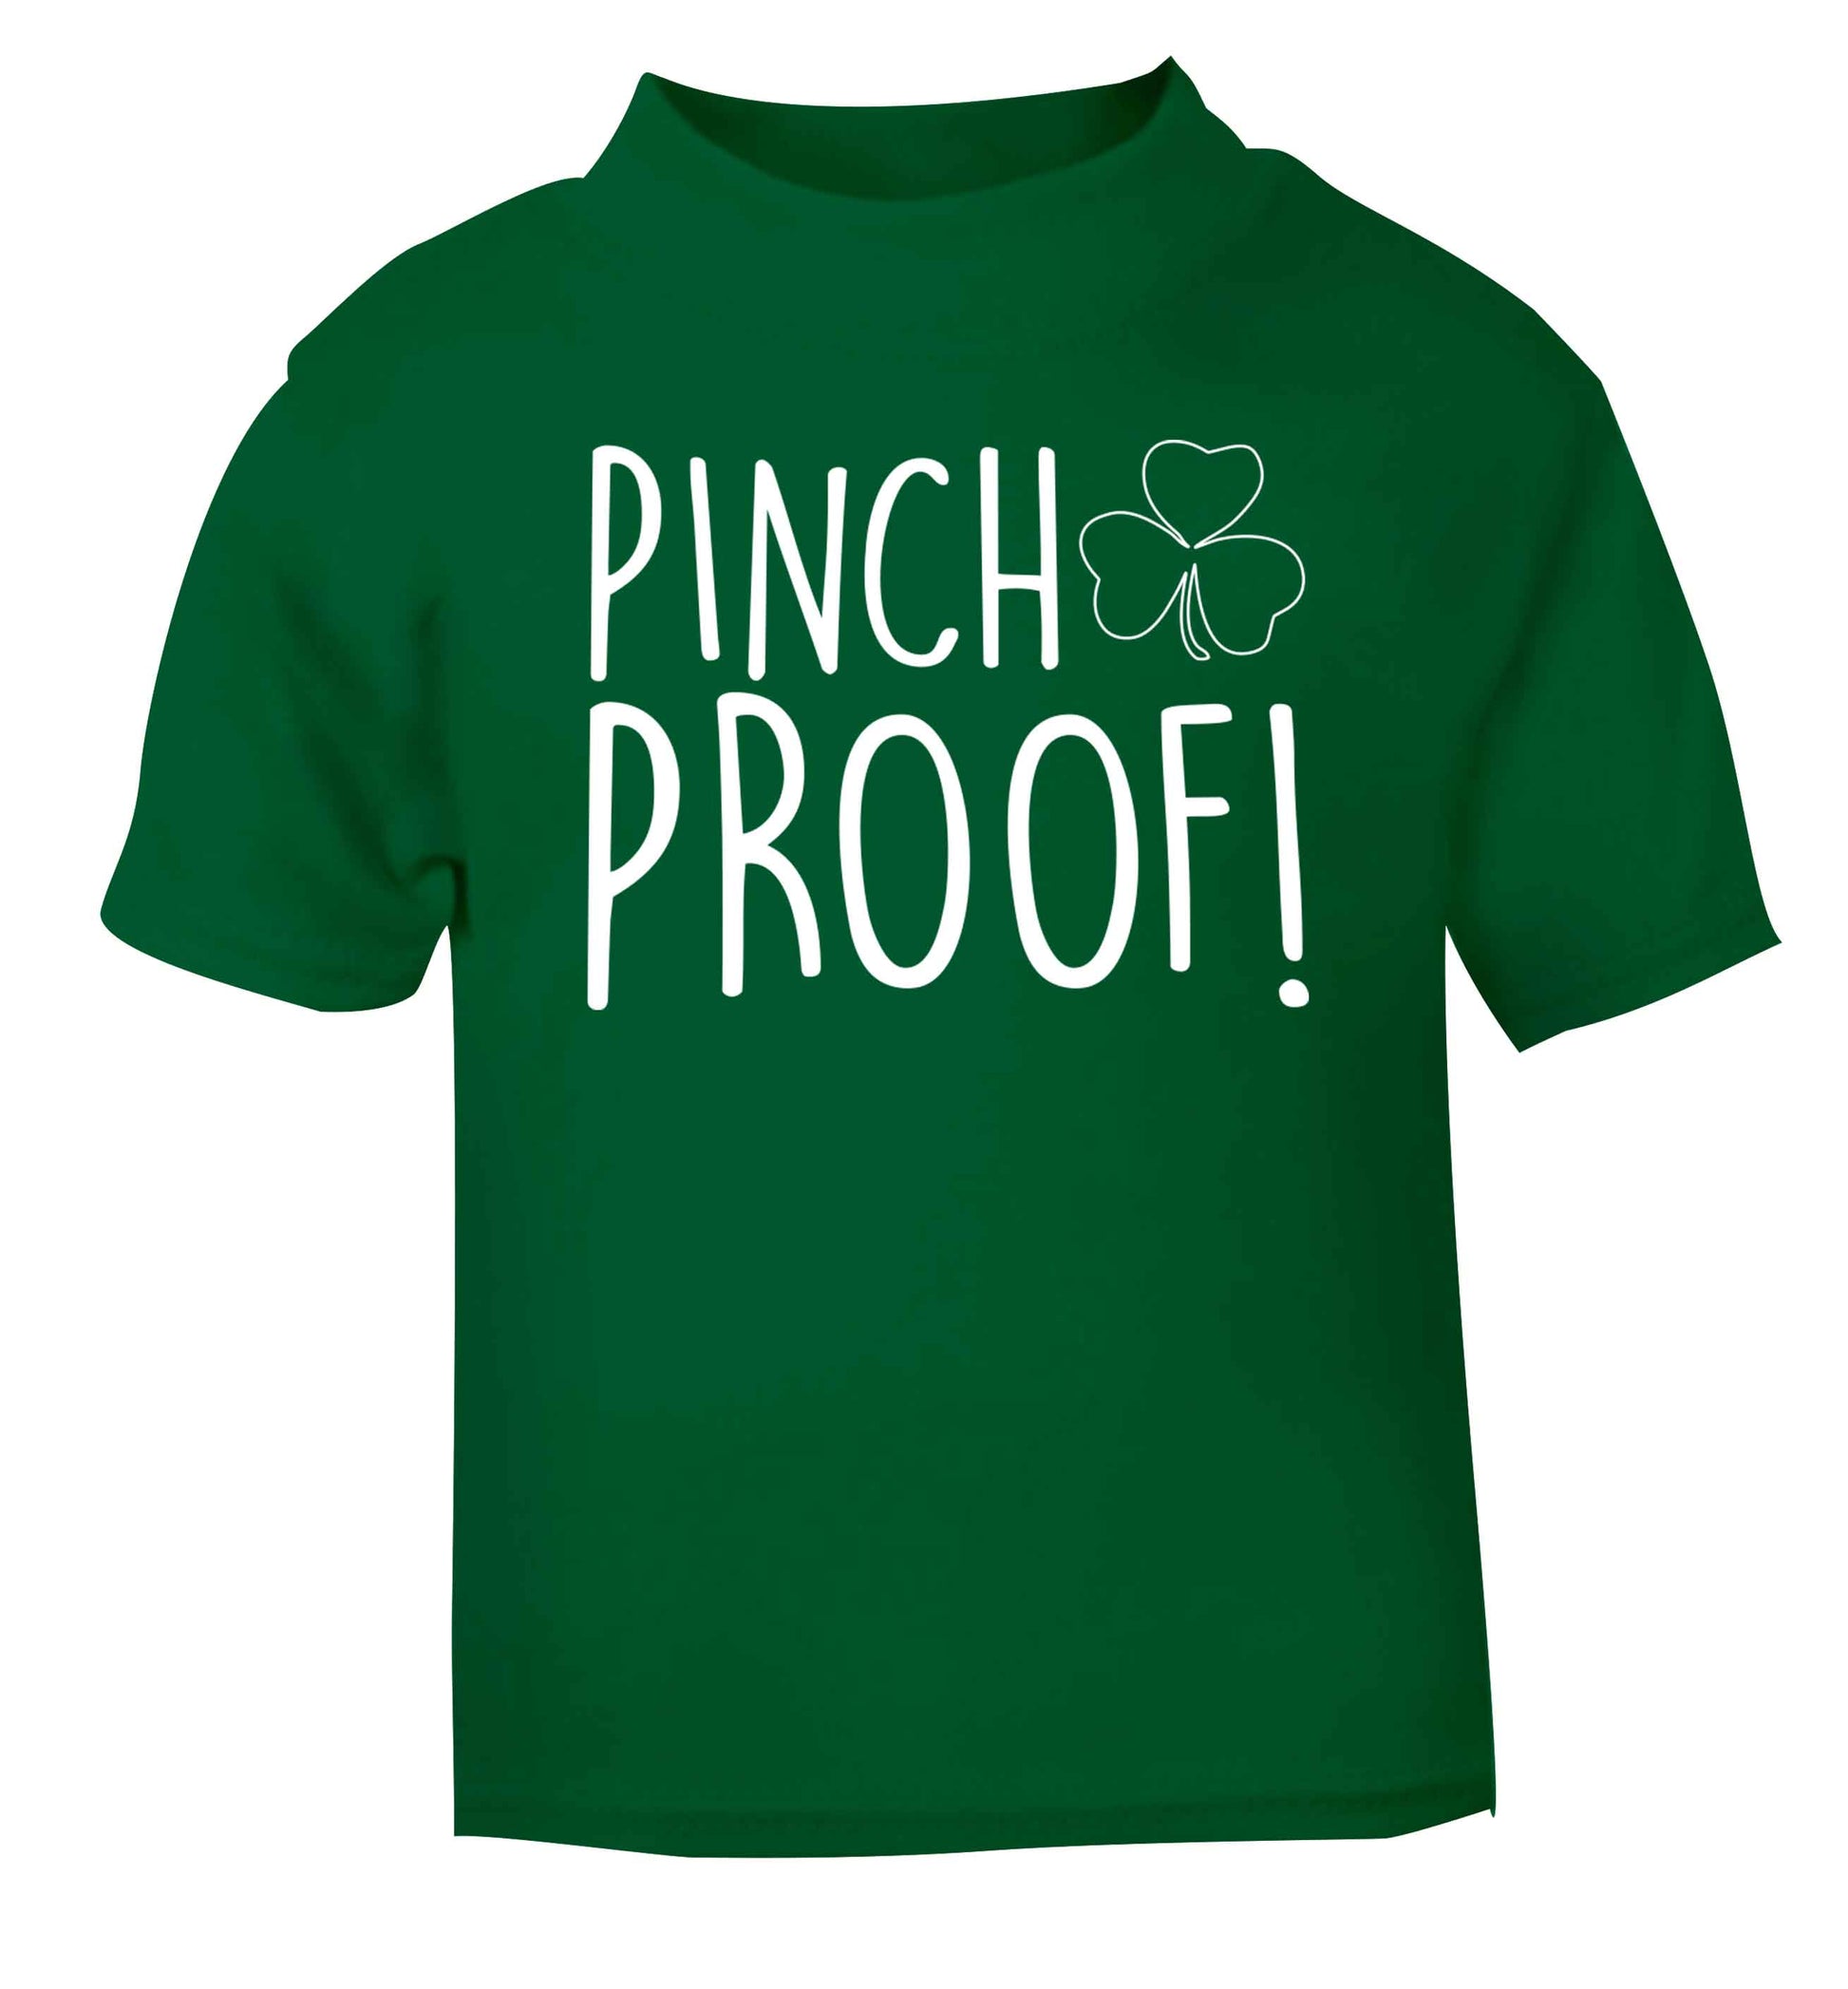 Pinch Proof green baby toddler Tshirt 2 Years